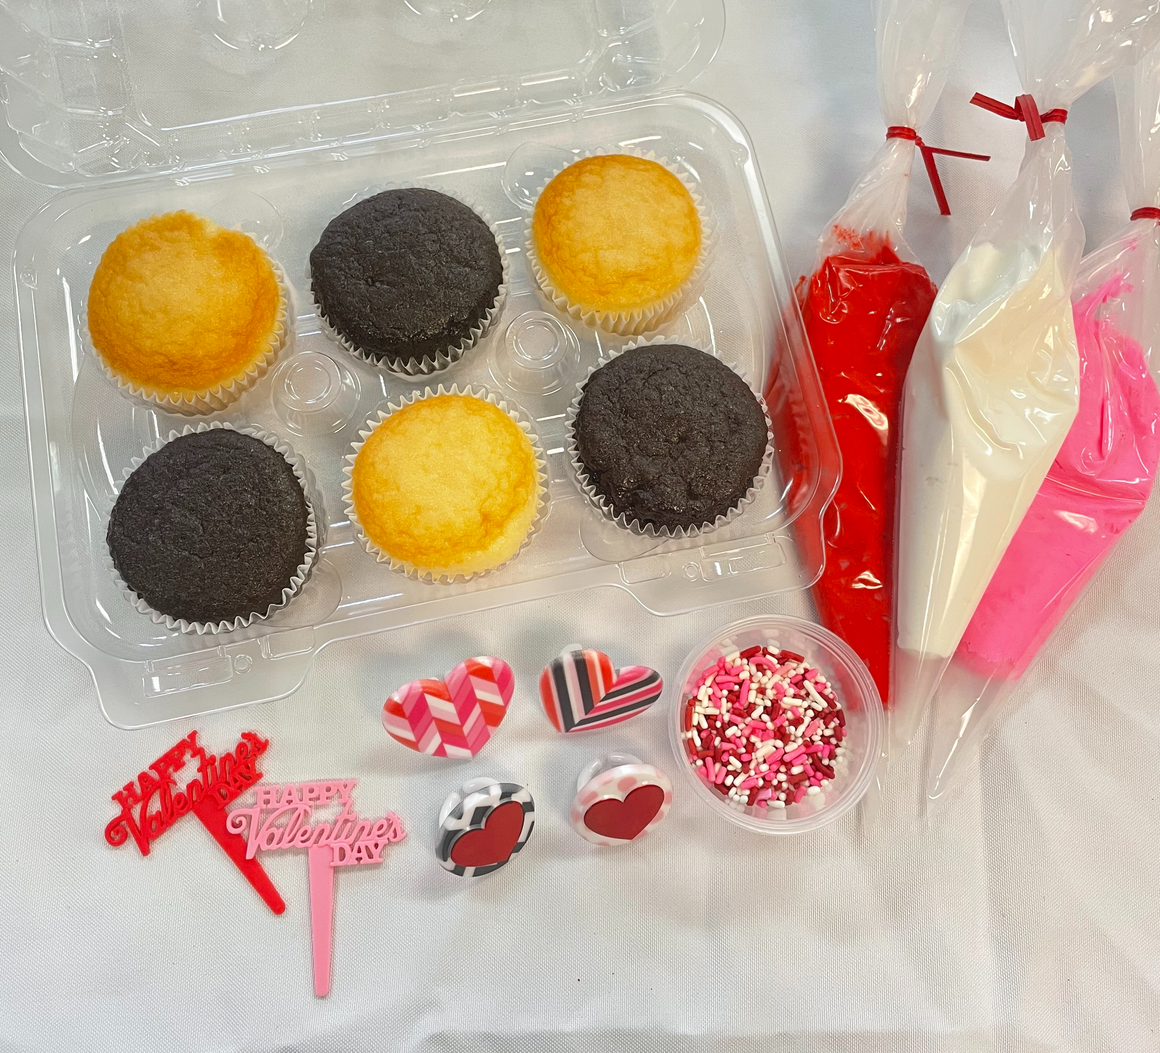 Decorate Your Own Valentine Cupcakes